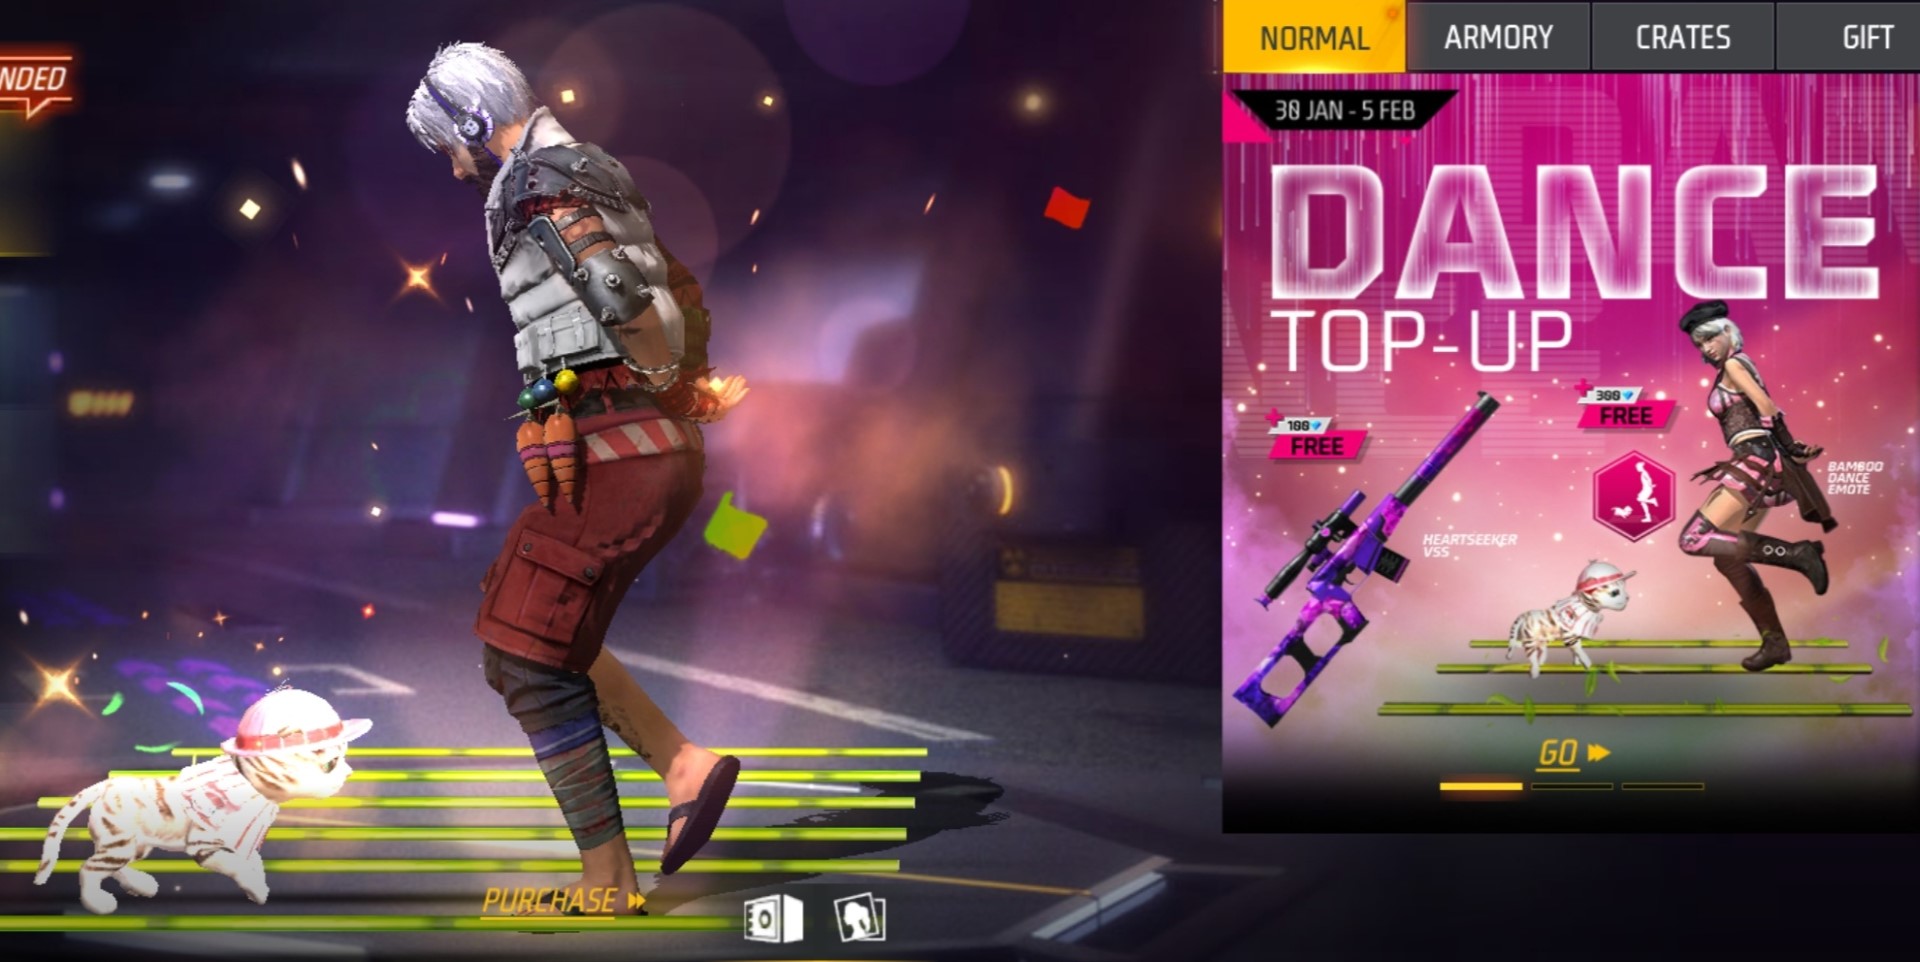 Free Fire max new Dance top-up event